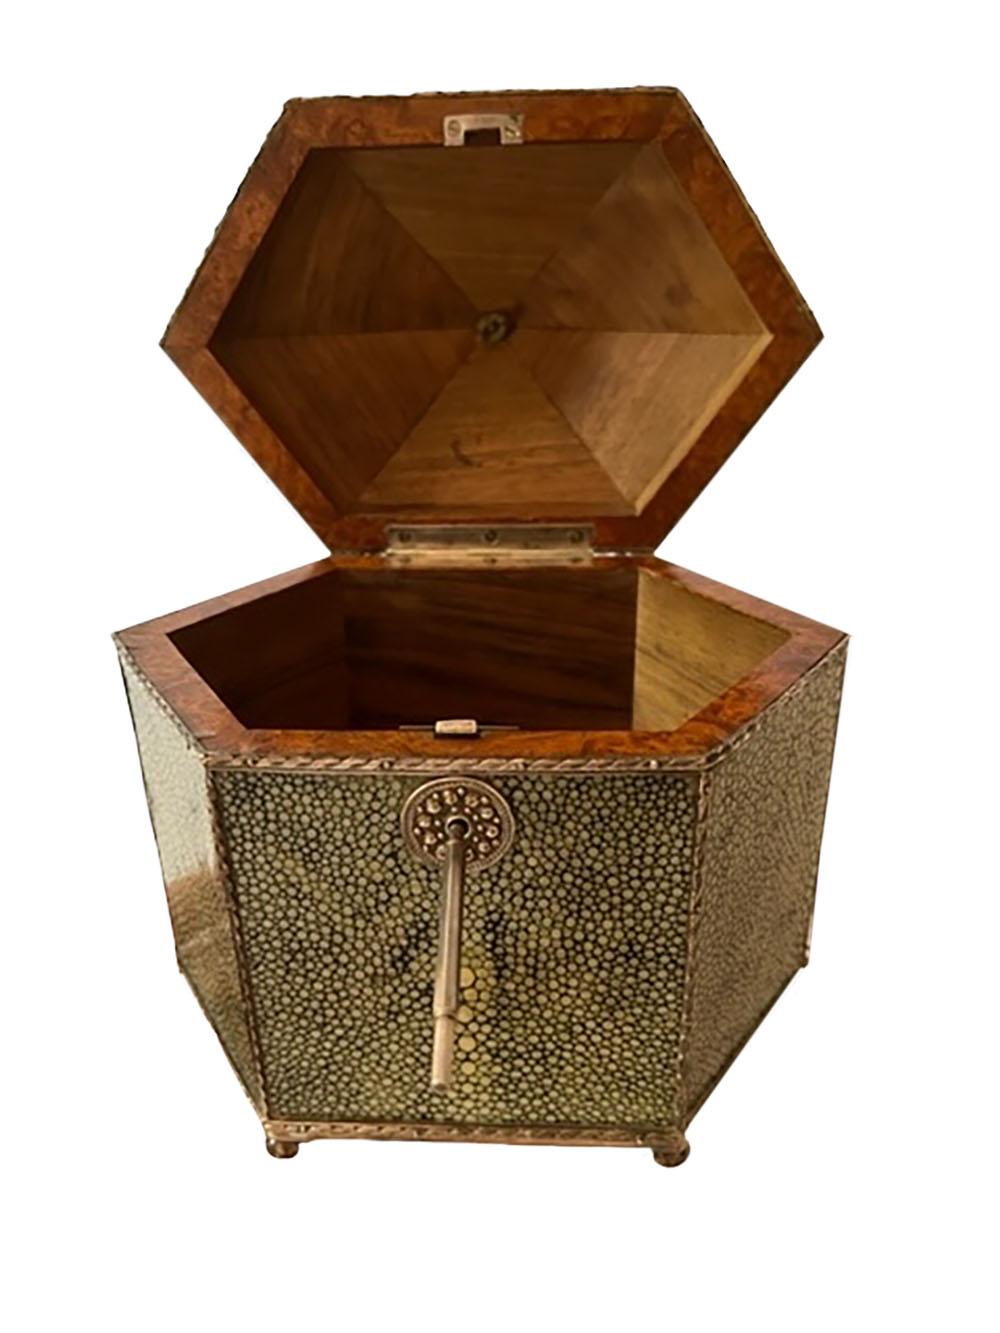 English Shagreen Tea Caddy 19th with Bone Finial In Good Condition For Sale In Dallas, TX